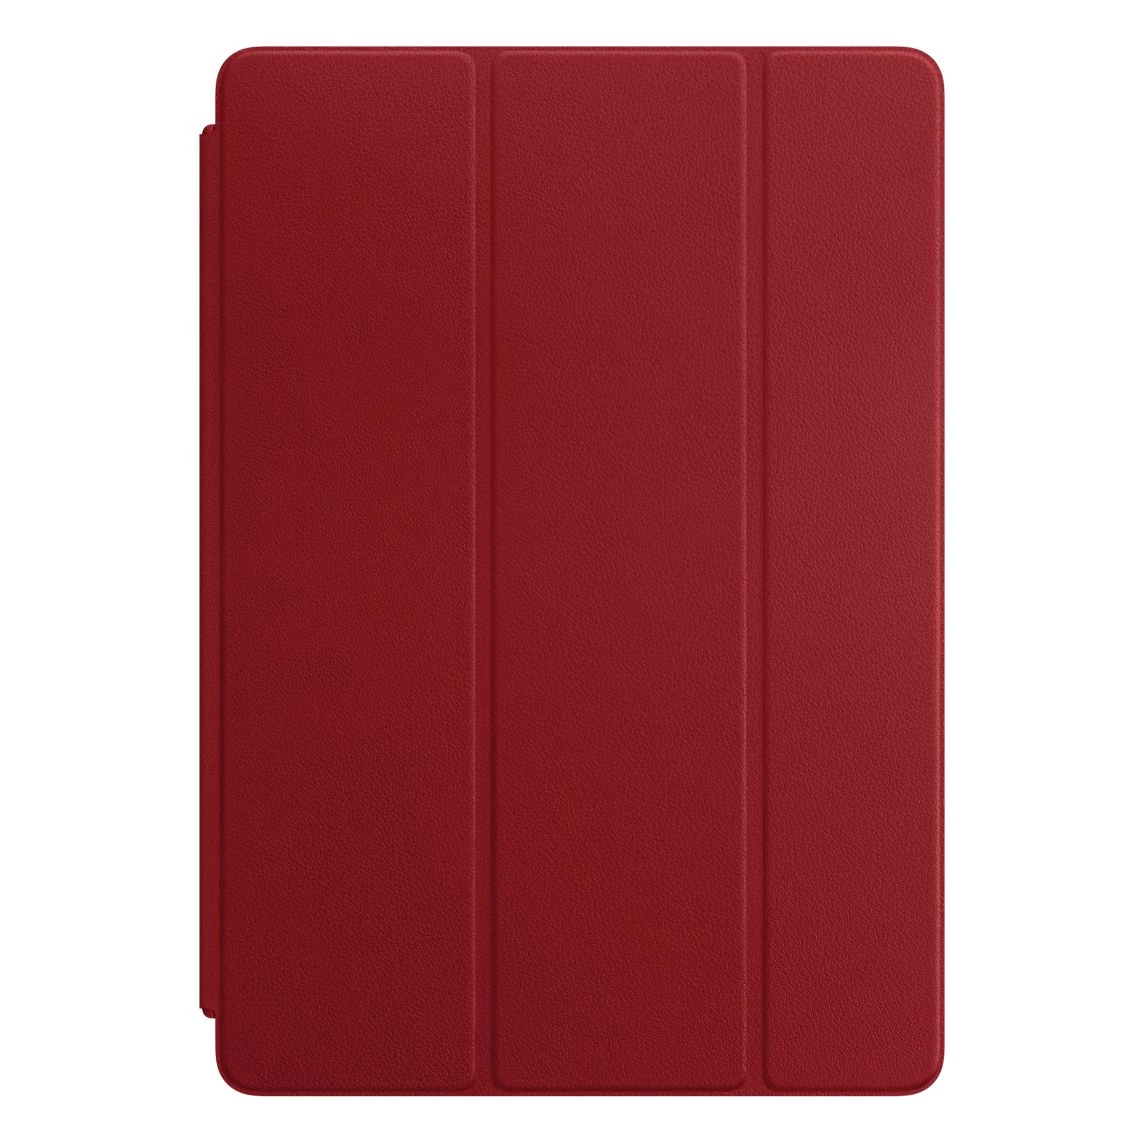 Apple Leather Smart Cover for iPad 10.2" / Air 3 / Pro 10.5" - PRODUCT RED (MR5G2)